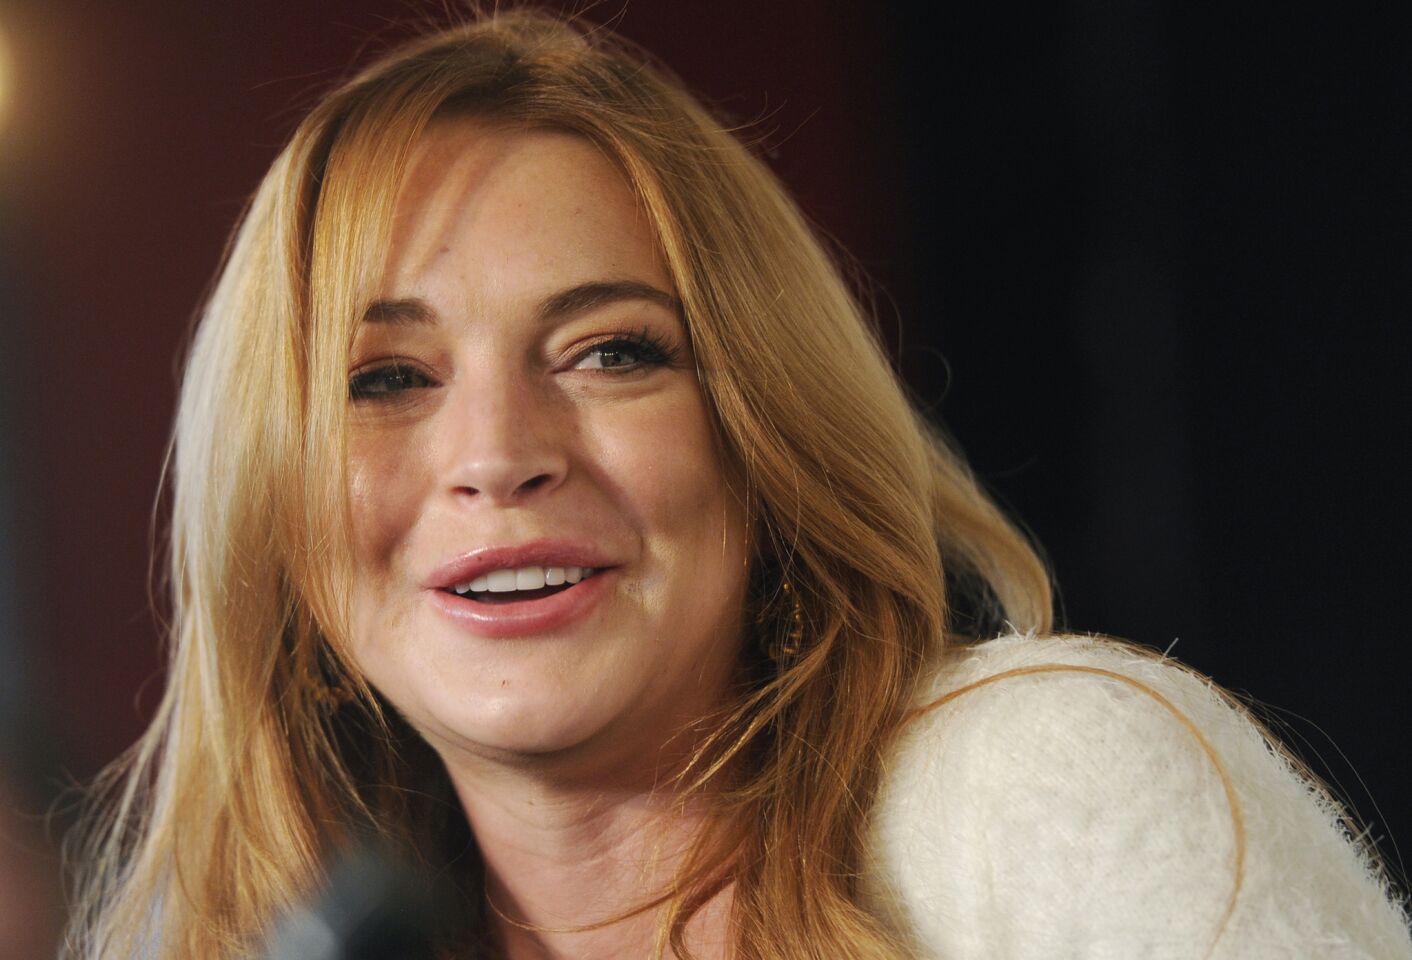 For once the attention shifted from Lindsay Lohan to her mother when Dina Lohan was arrested on suspicion of drunk driving in New York. But the attention swung right back to Lindsay when she arrived at her mother's home in a top with low, like really low, sides -- revealing much of her chest.